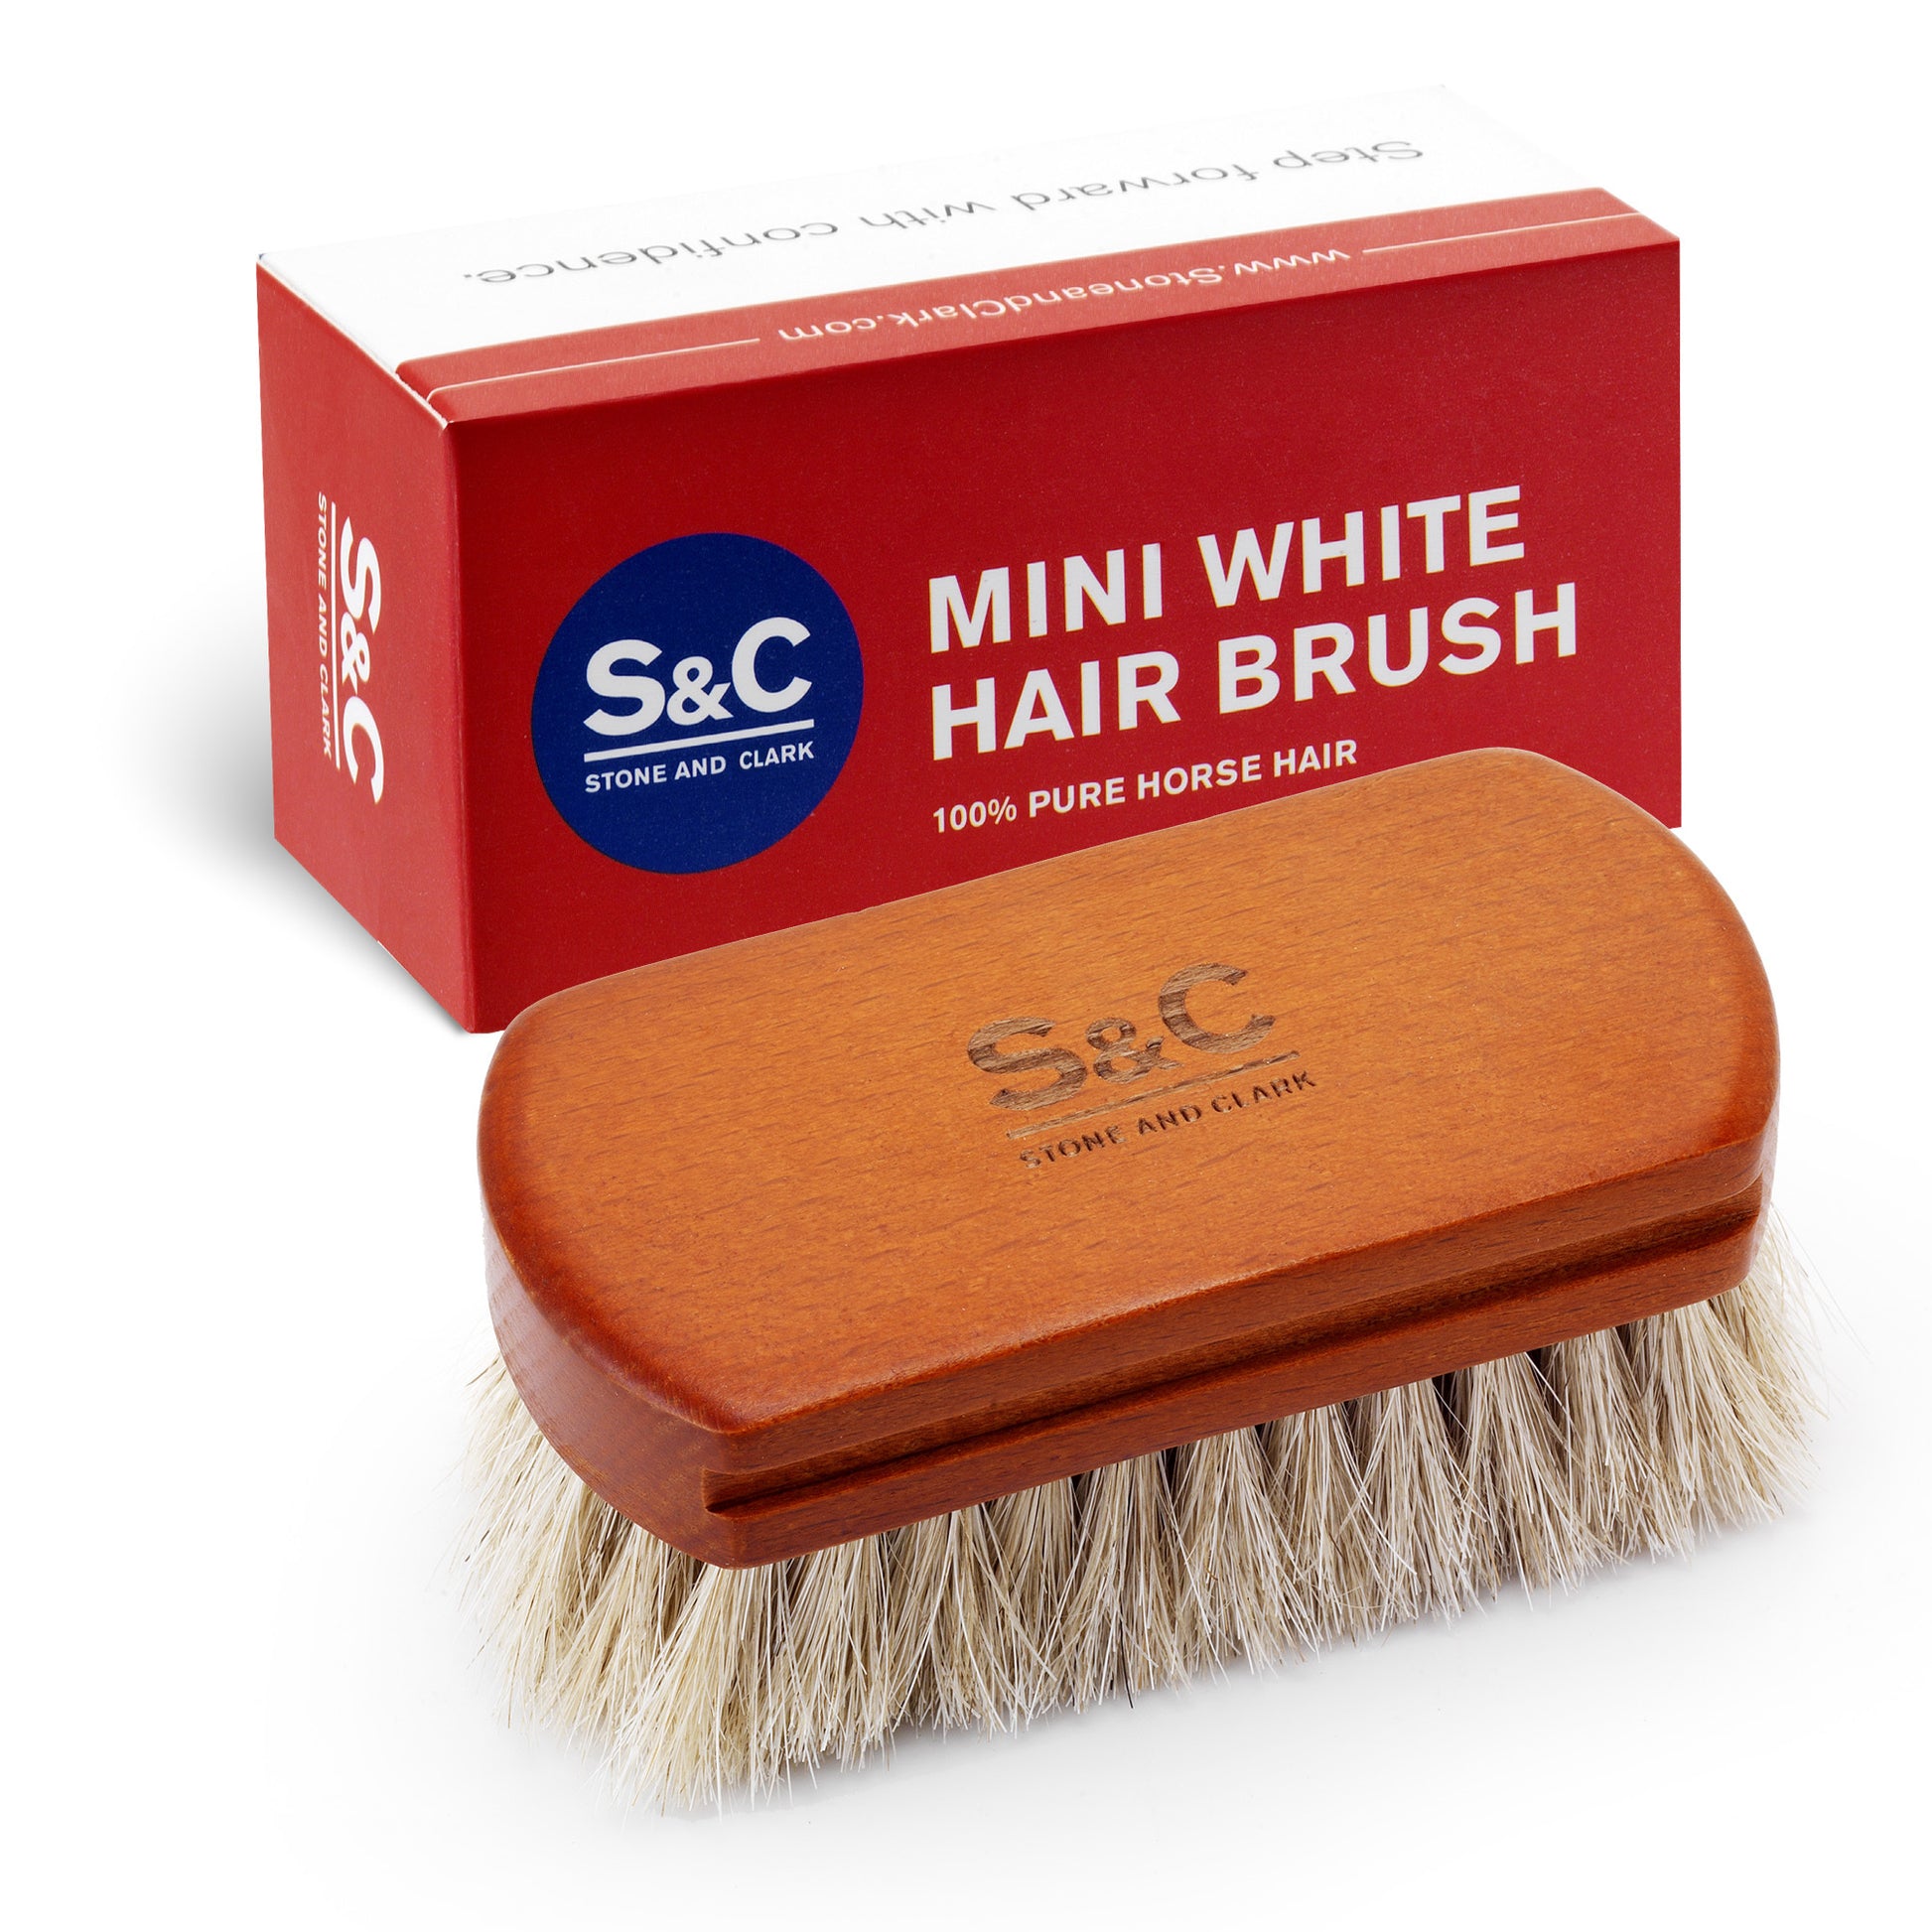 Stone and Clark White Horsehair Leather Shoe Brush